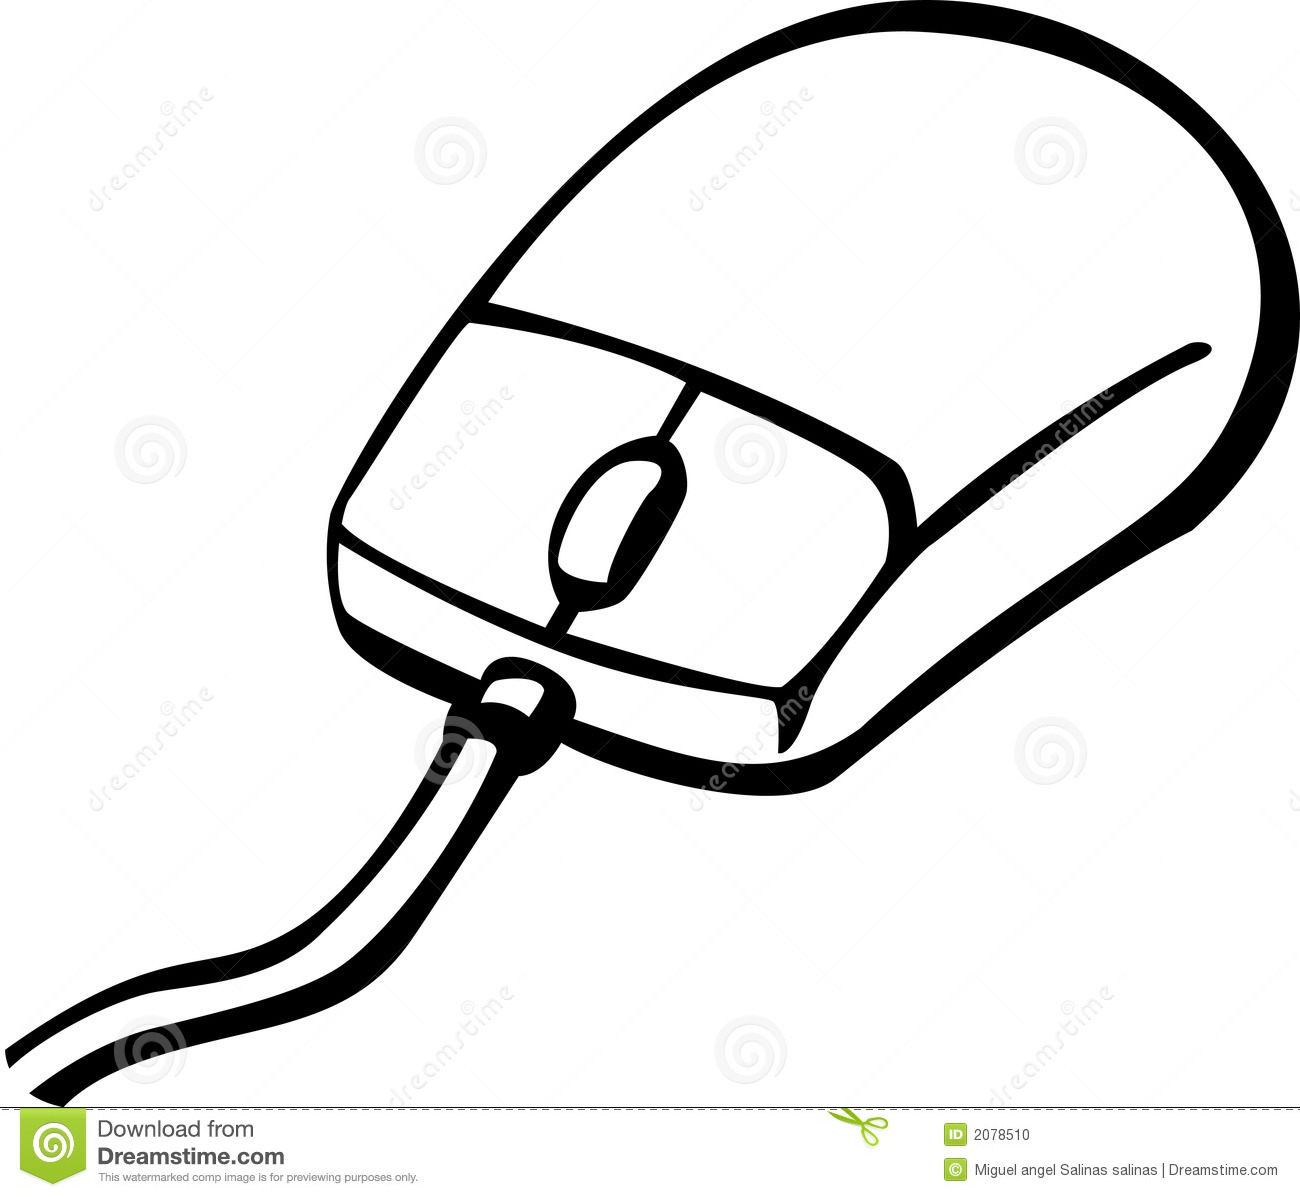 Computer Mouse Outline